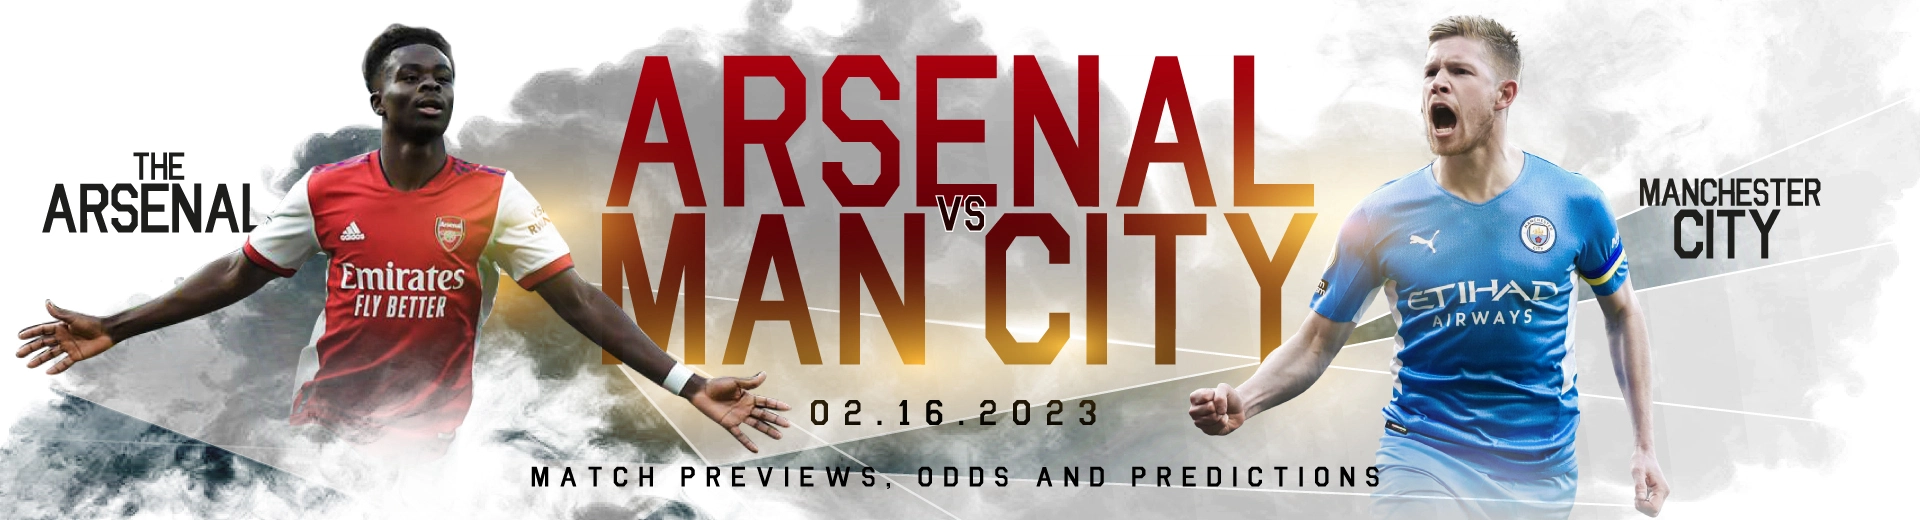 Arsenal vs. Manchester City 02/16/2023 | Match Previews, Odds, and Predictions